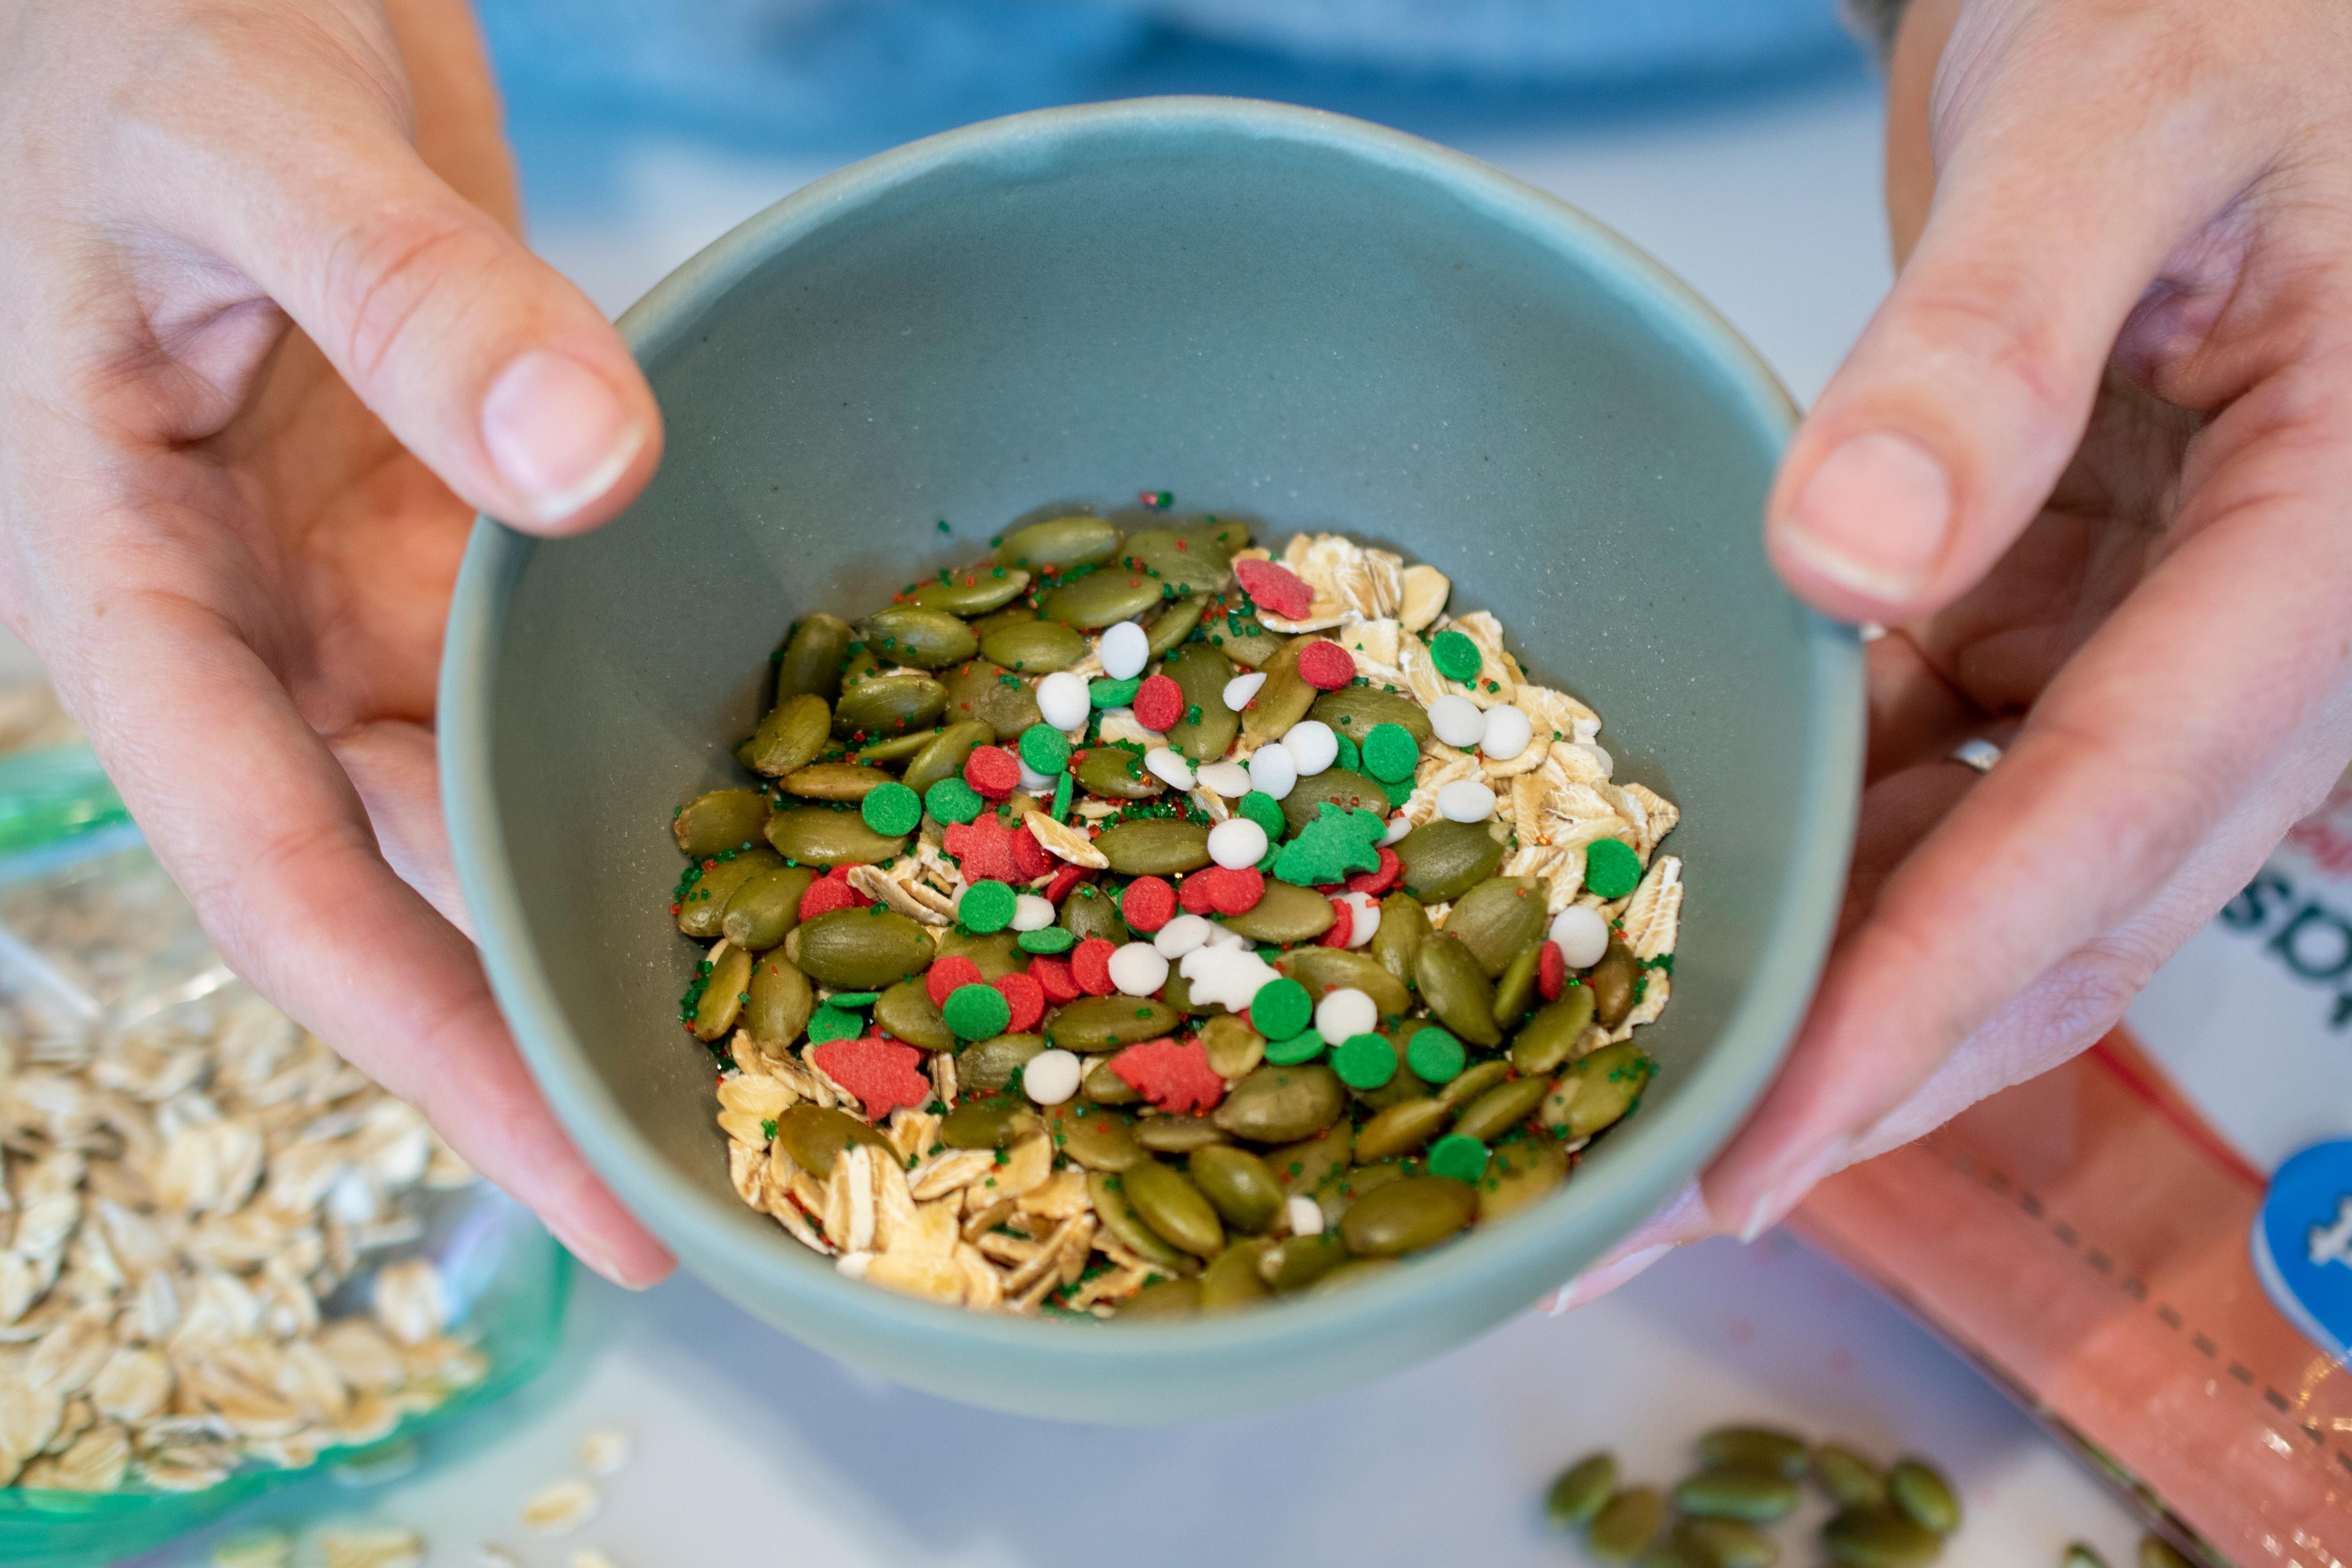 A person holding a bowl filled with sprinkles, oats, and pumpkin seeds